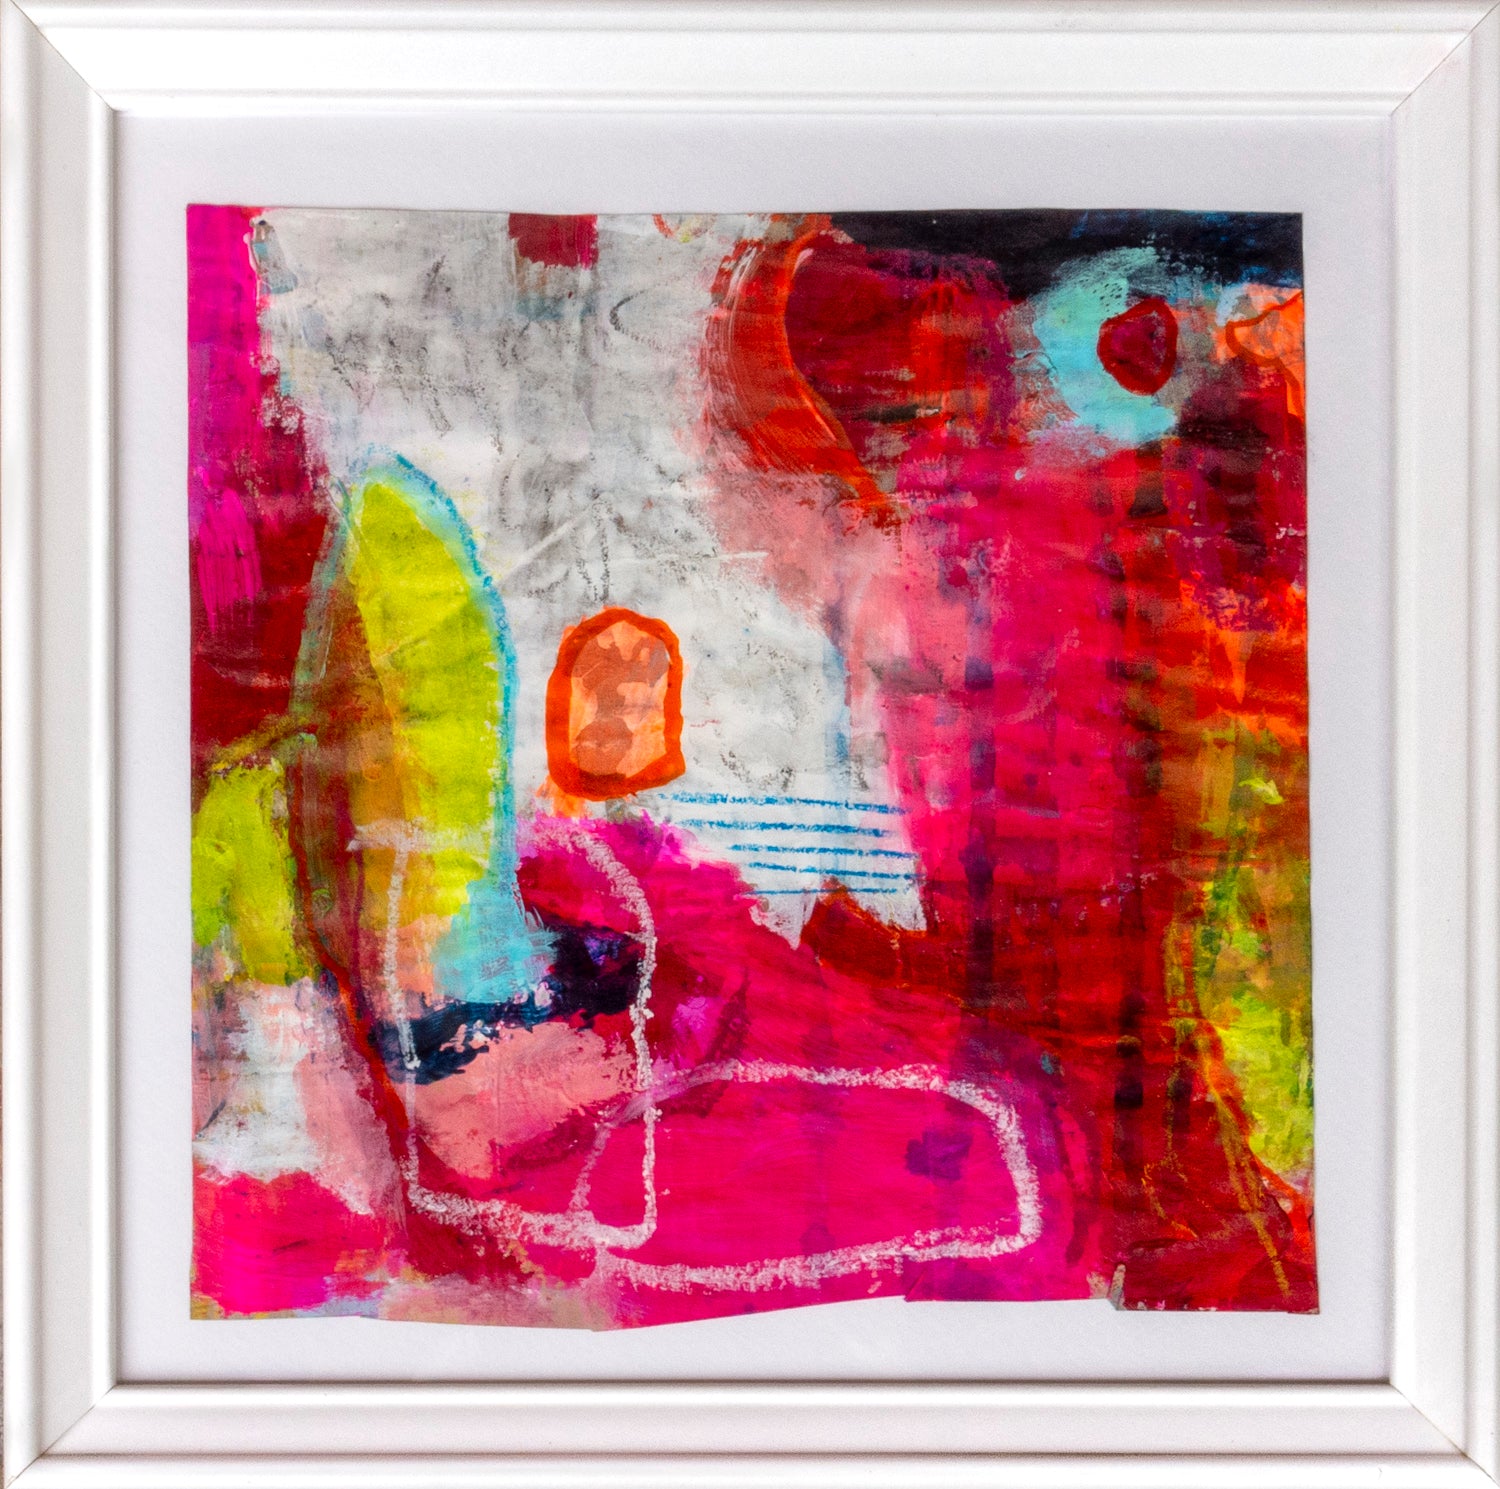 Colorful acrylic abstract painting on paper titled 'Part of the Whole #4' by artist Steffi Möllers; measures app 7.5"x7.5"; w/frame measures 10"x10"